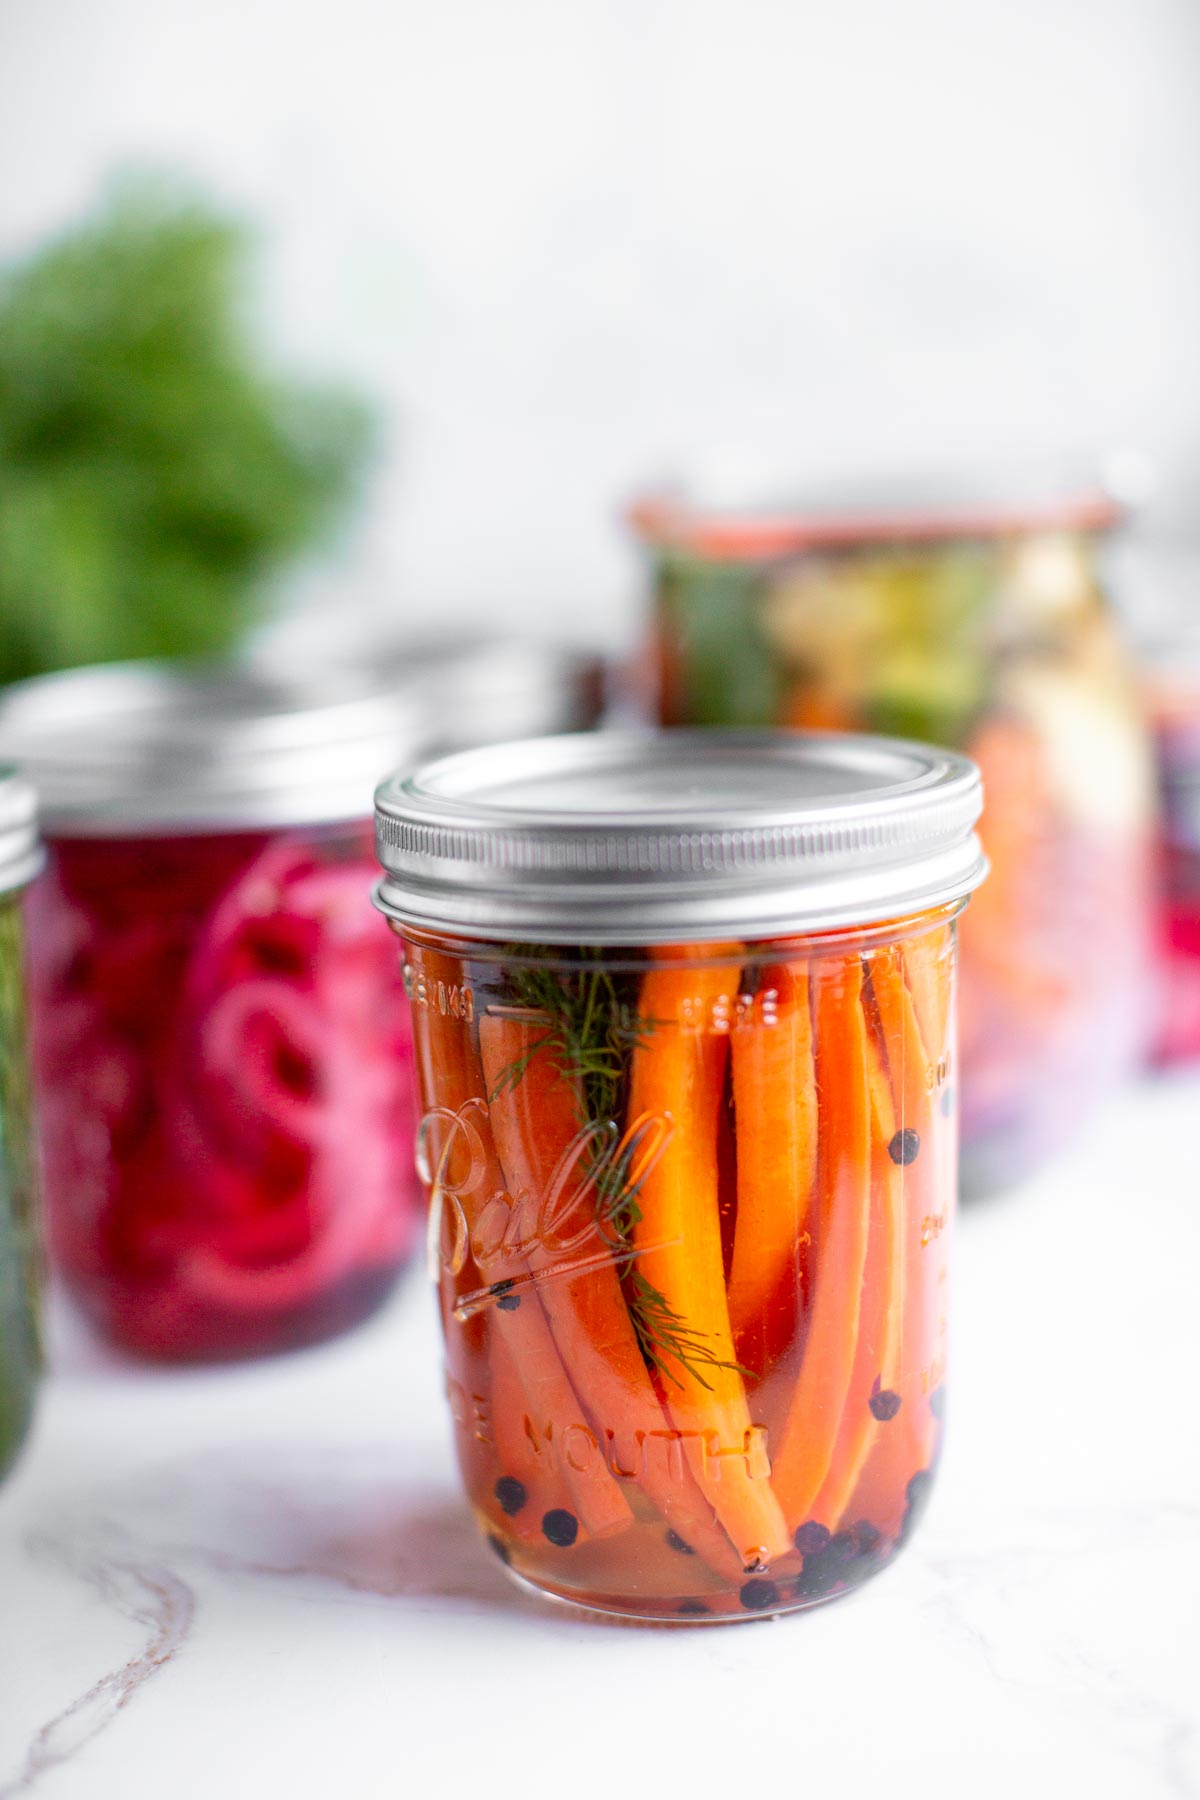 Pickled carrots in a glass jar with various jars of pickled veggies behind it.